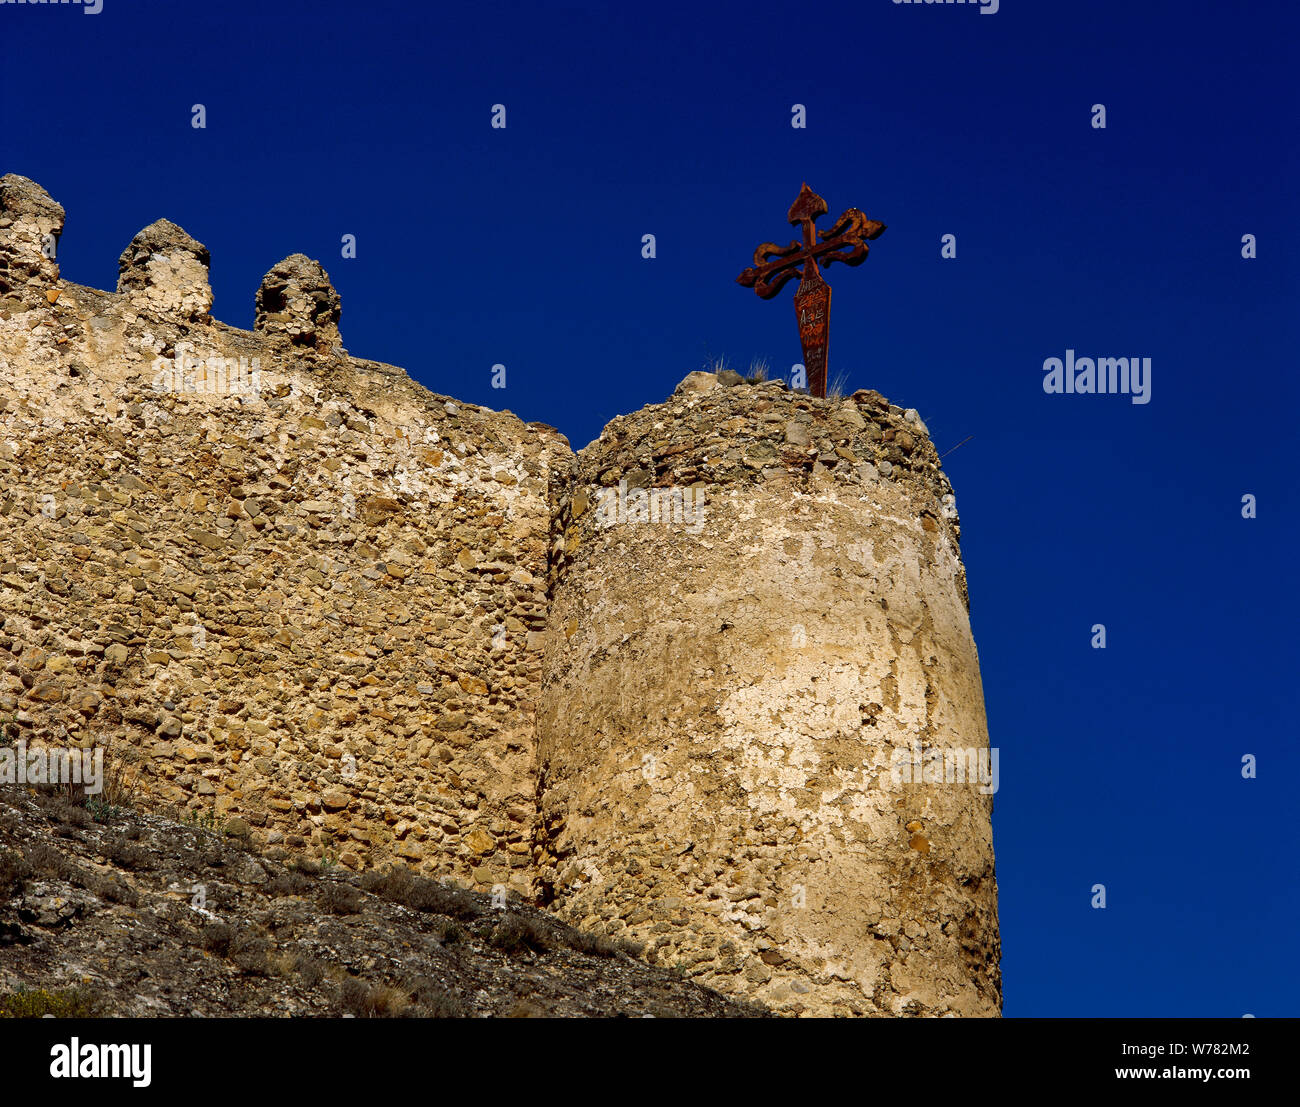 Spain. La Rioja. Clavijo. Medieval castle, architectural detail. A large cross of Santiago stuck upon a tower recalls the legend Battle of Clavjio in 844, which took place during the Reconquest. La Rioja Baja. Stock Photo